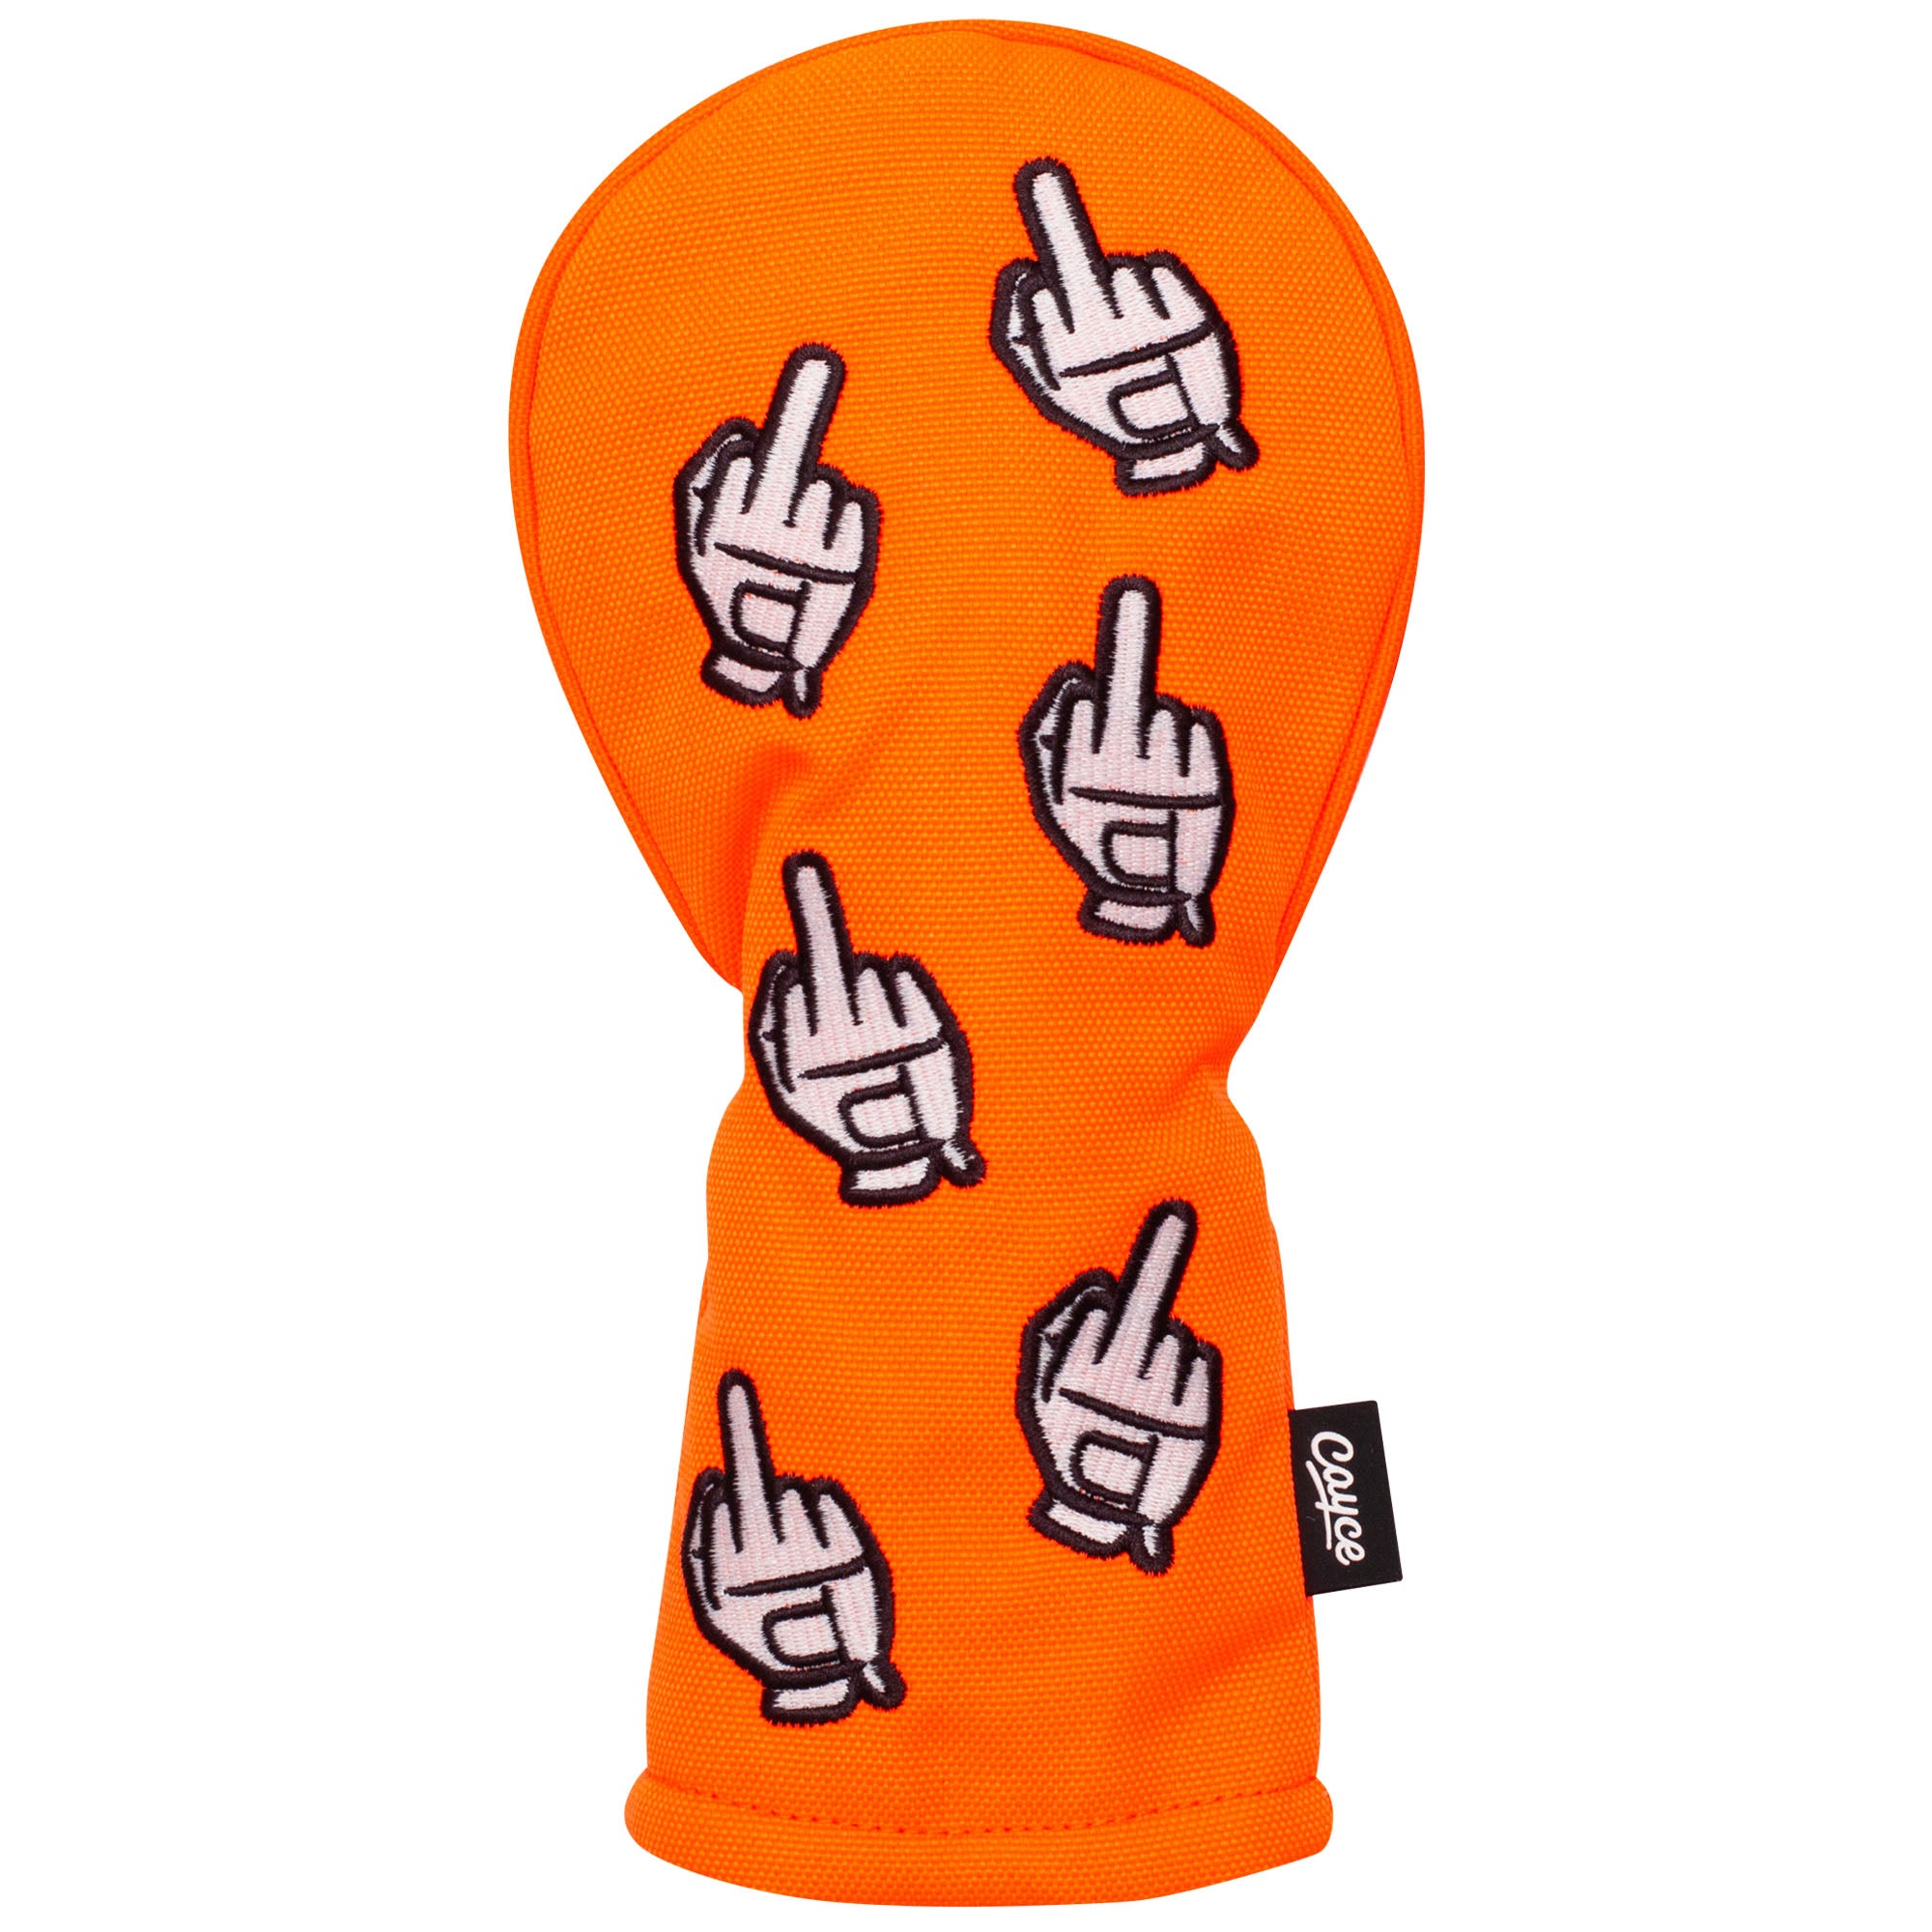 A fluorescent orange, hourglass-shaped hybrid headcover cover for golf with scattered embroidered golf glove middle fingers. 